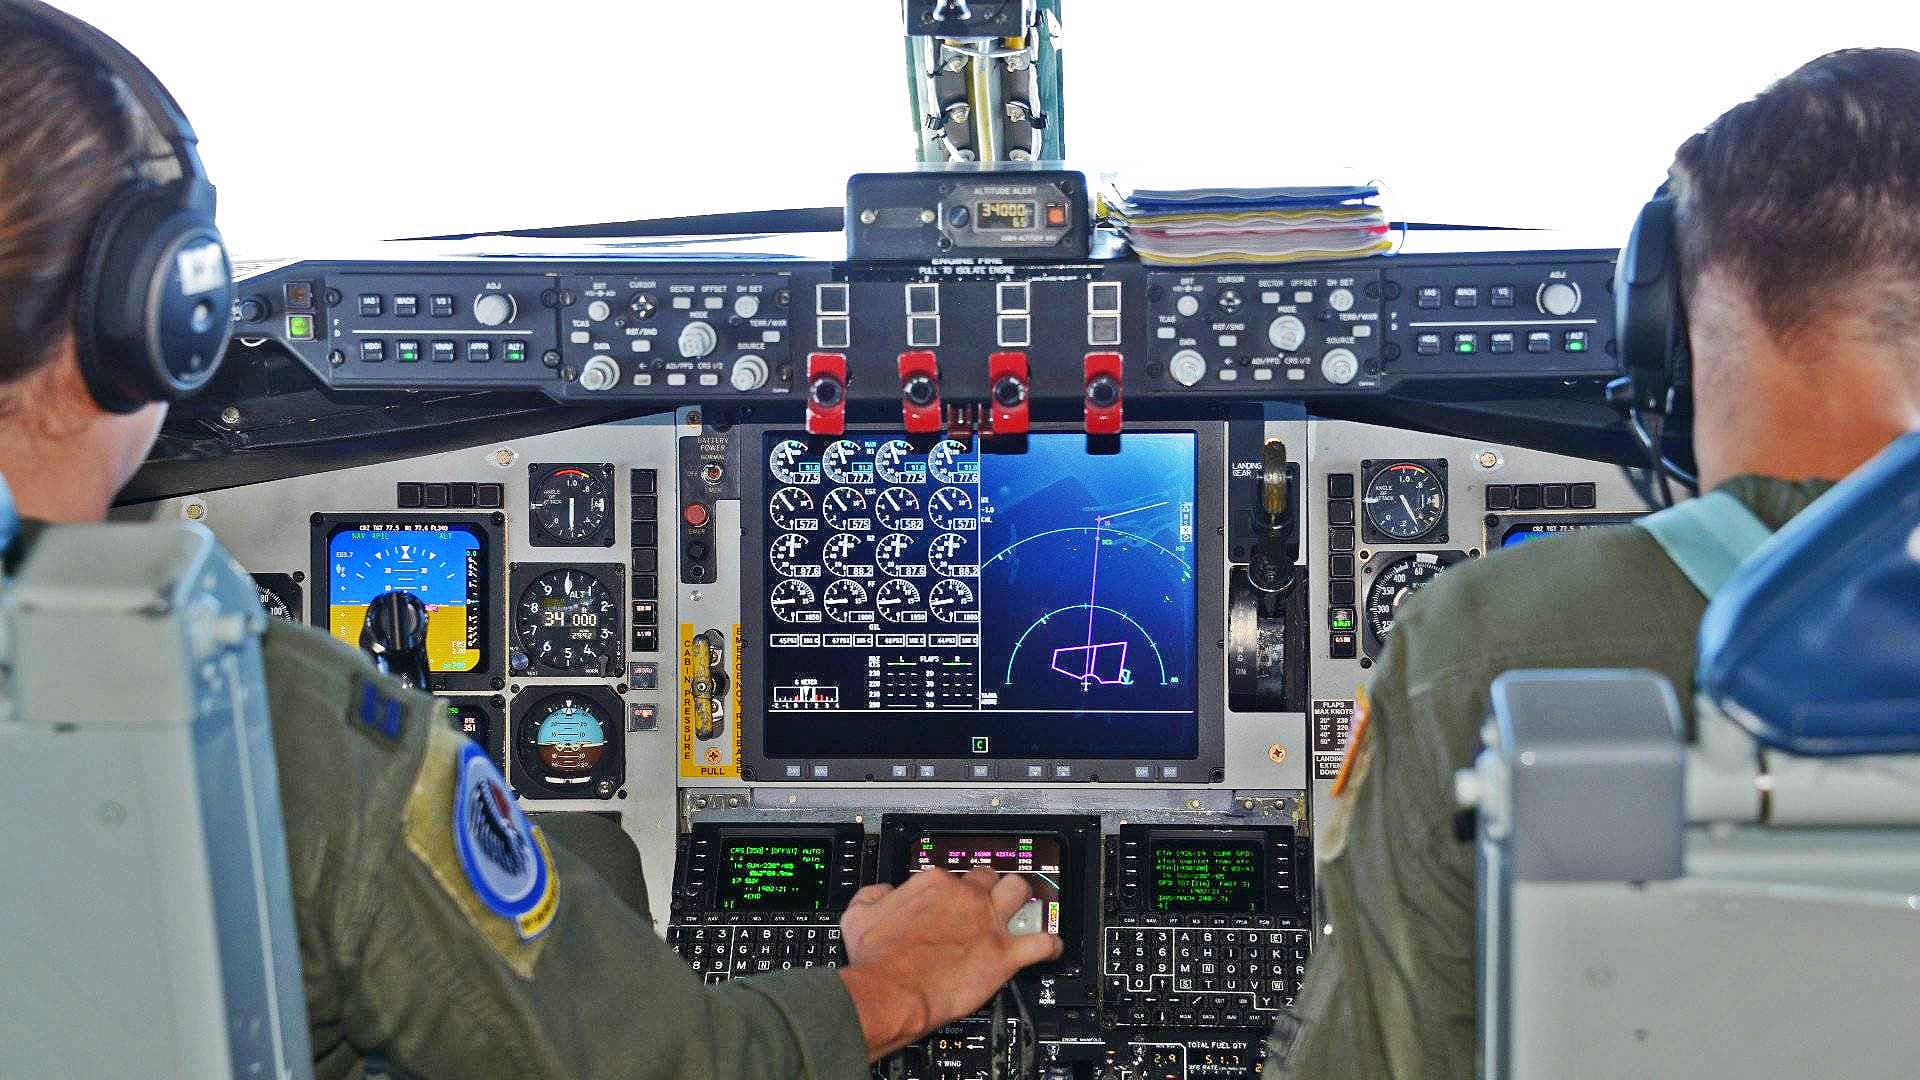 USAF Breathing New Life Into Ancient KC-135 Tankers With This New Glass Cockpit